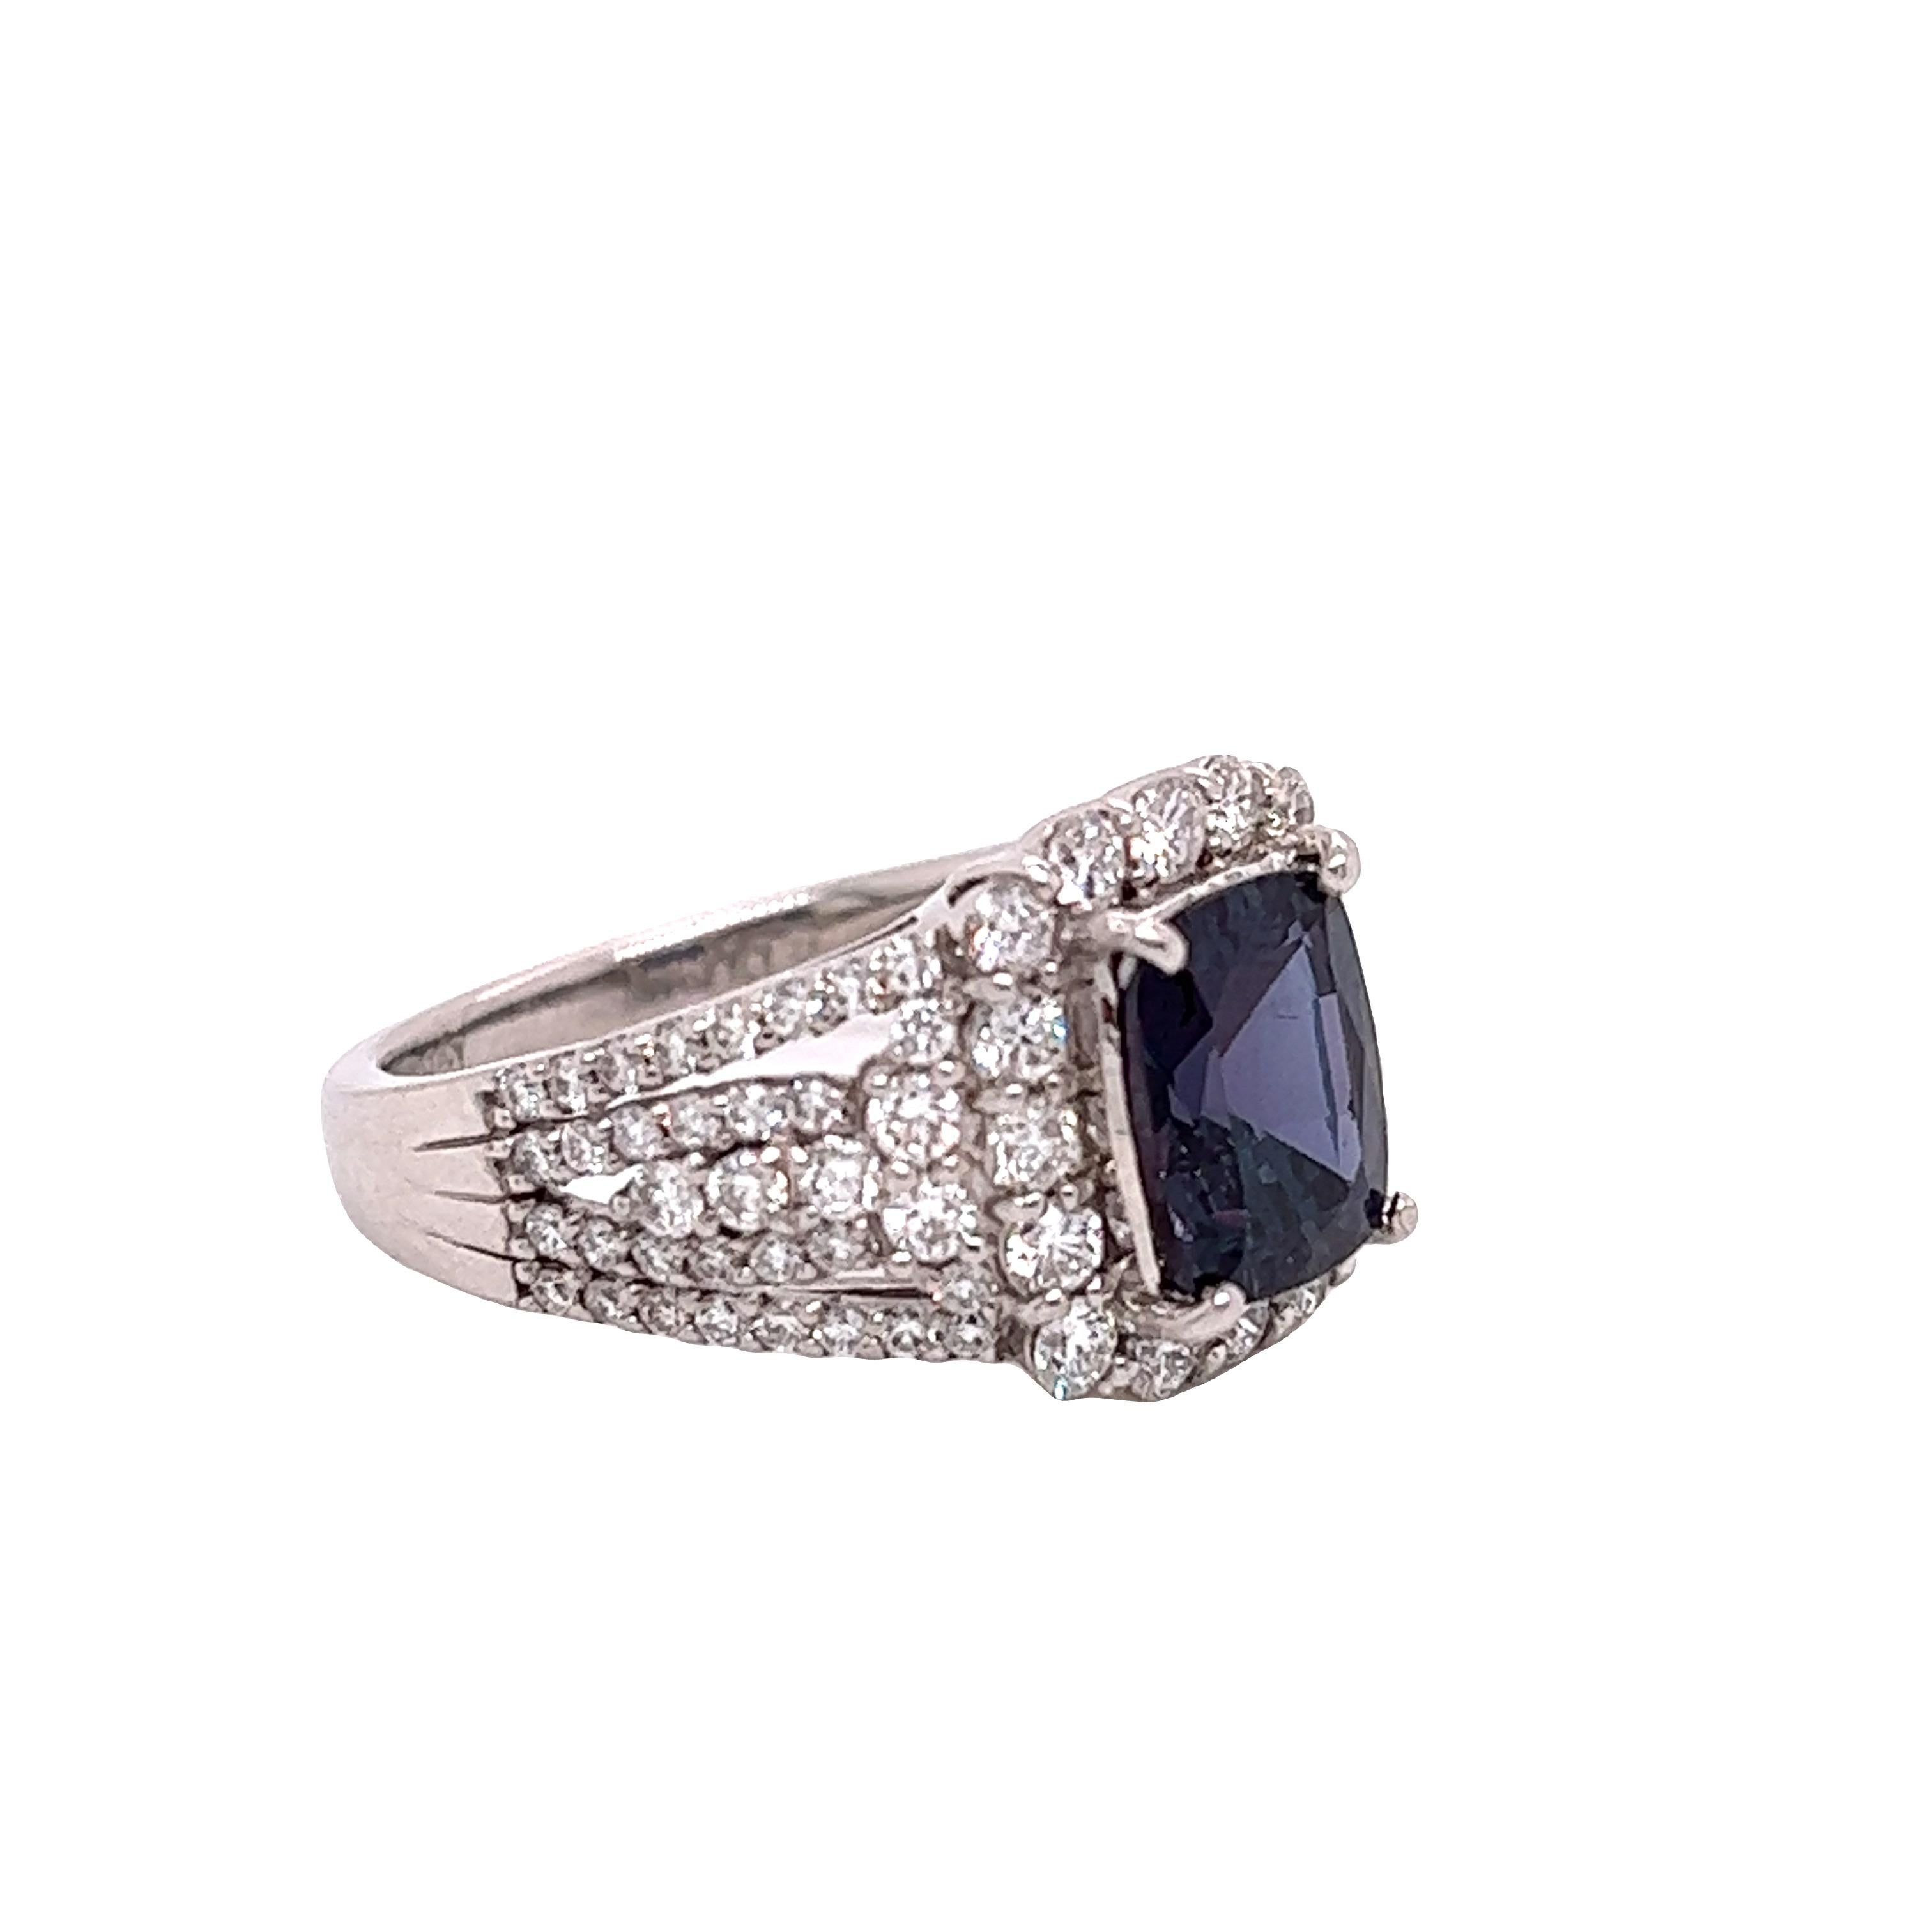 Victorian Natural GIA Certified 2.21 Ct. Brazillian Alexandrite & Diamond Cocktail Ring For Sale